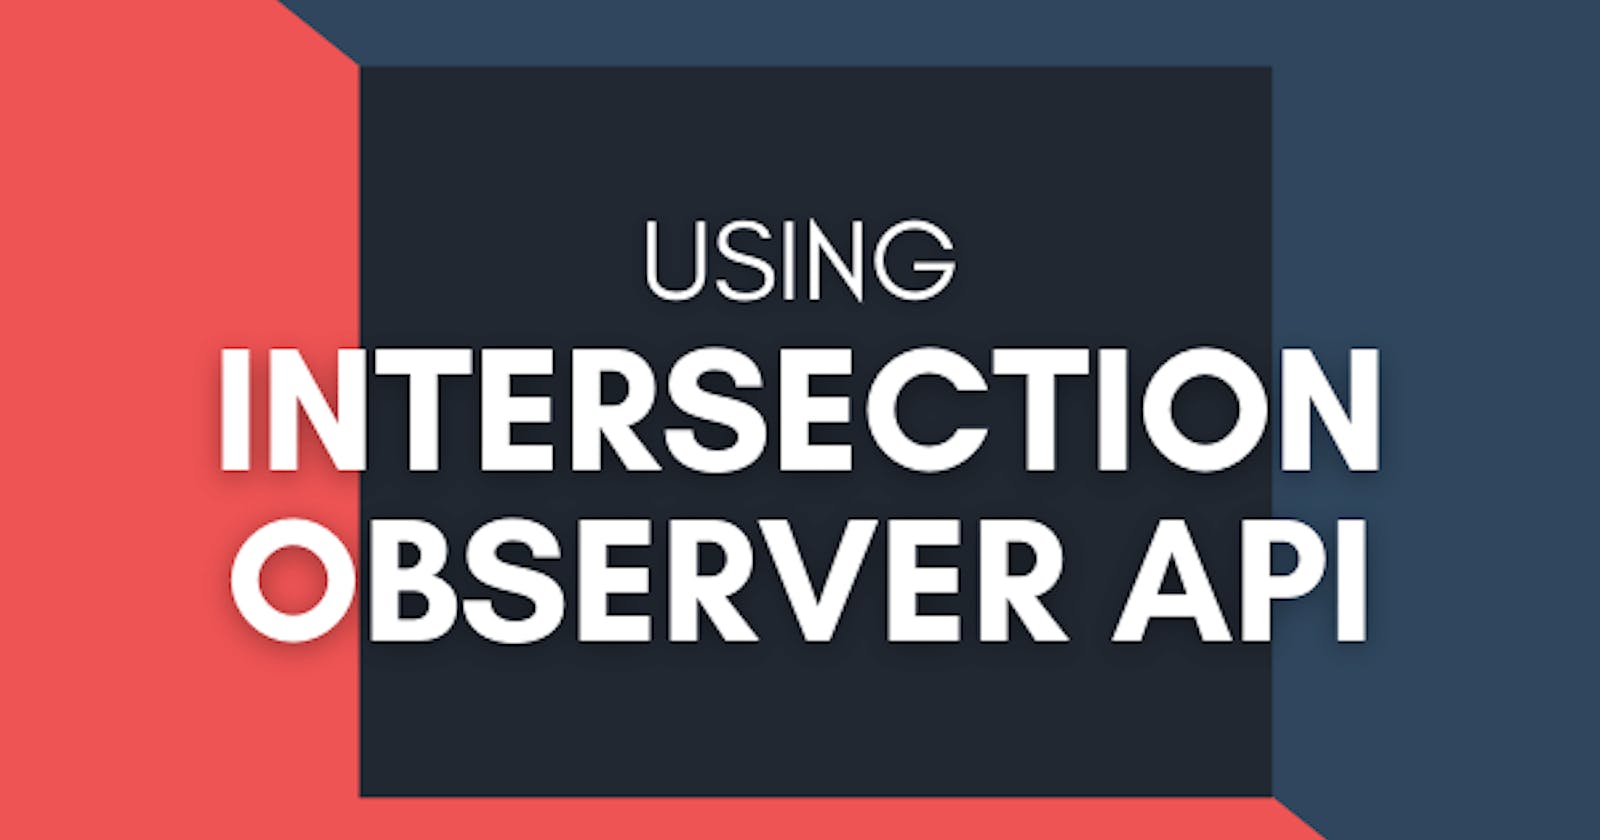 Intersection observer api in JS